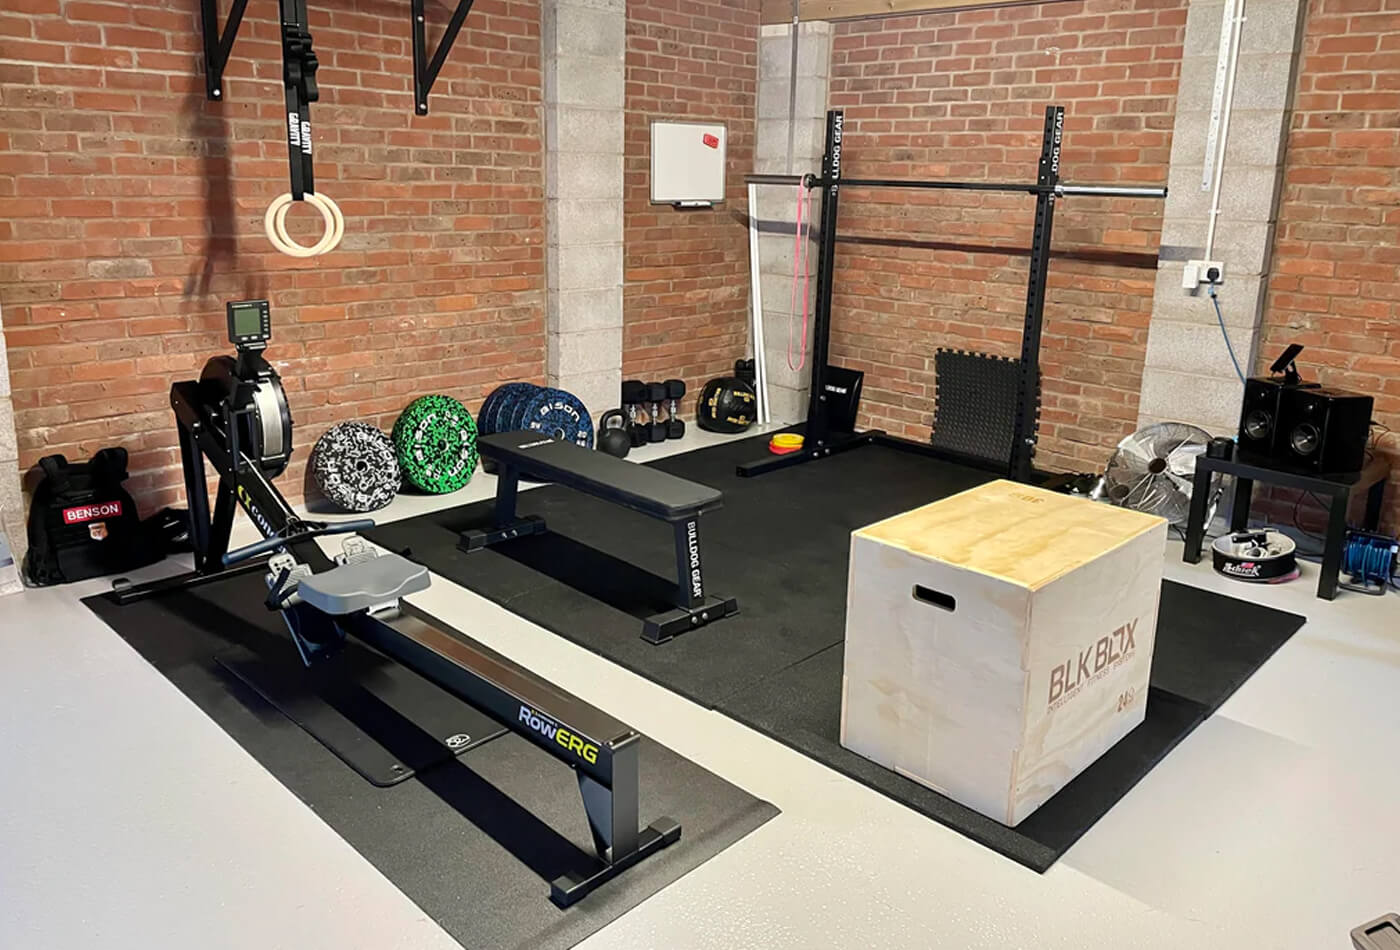 What Are the Benefits of Having a Home Training Space